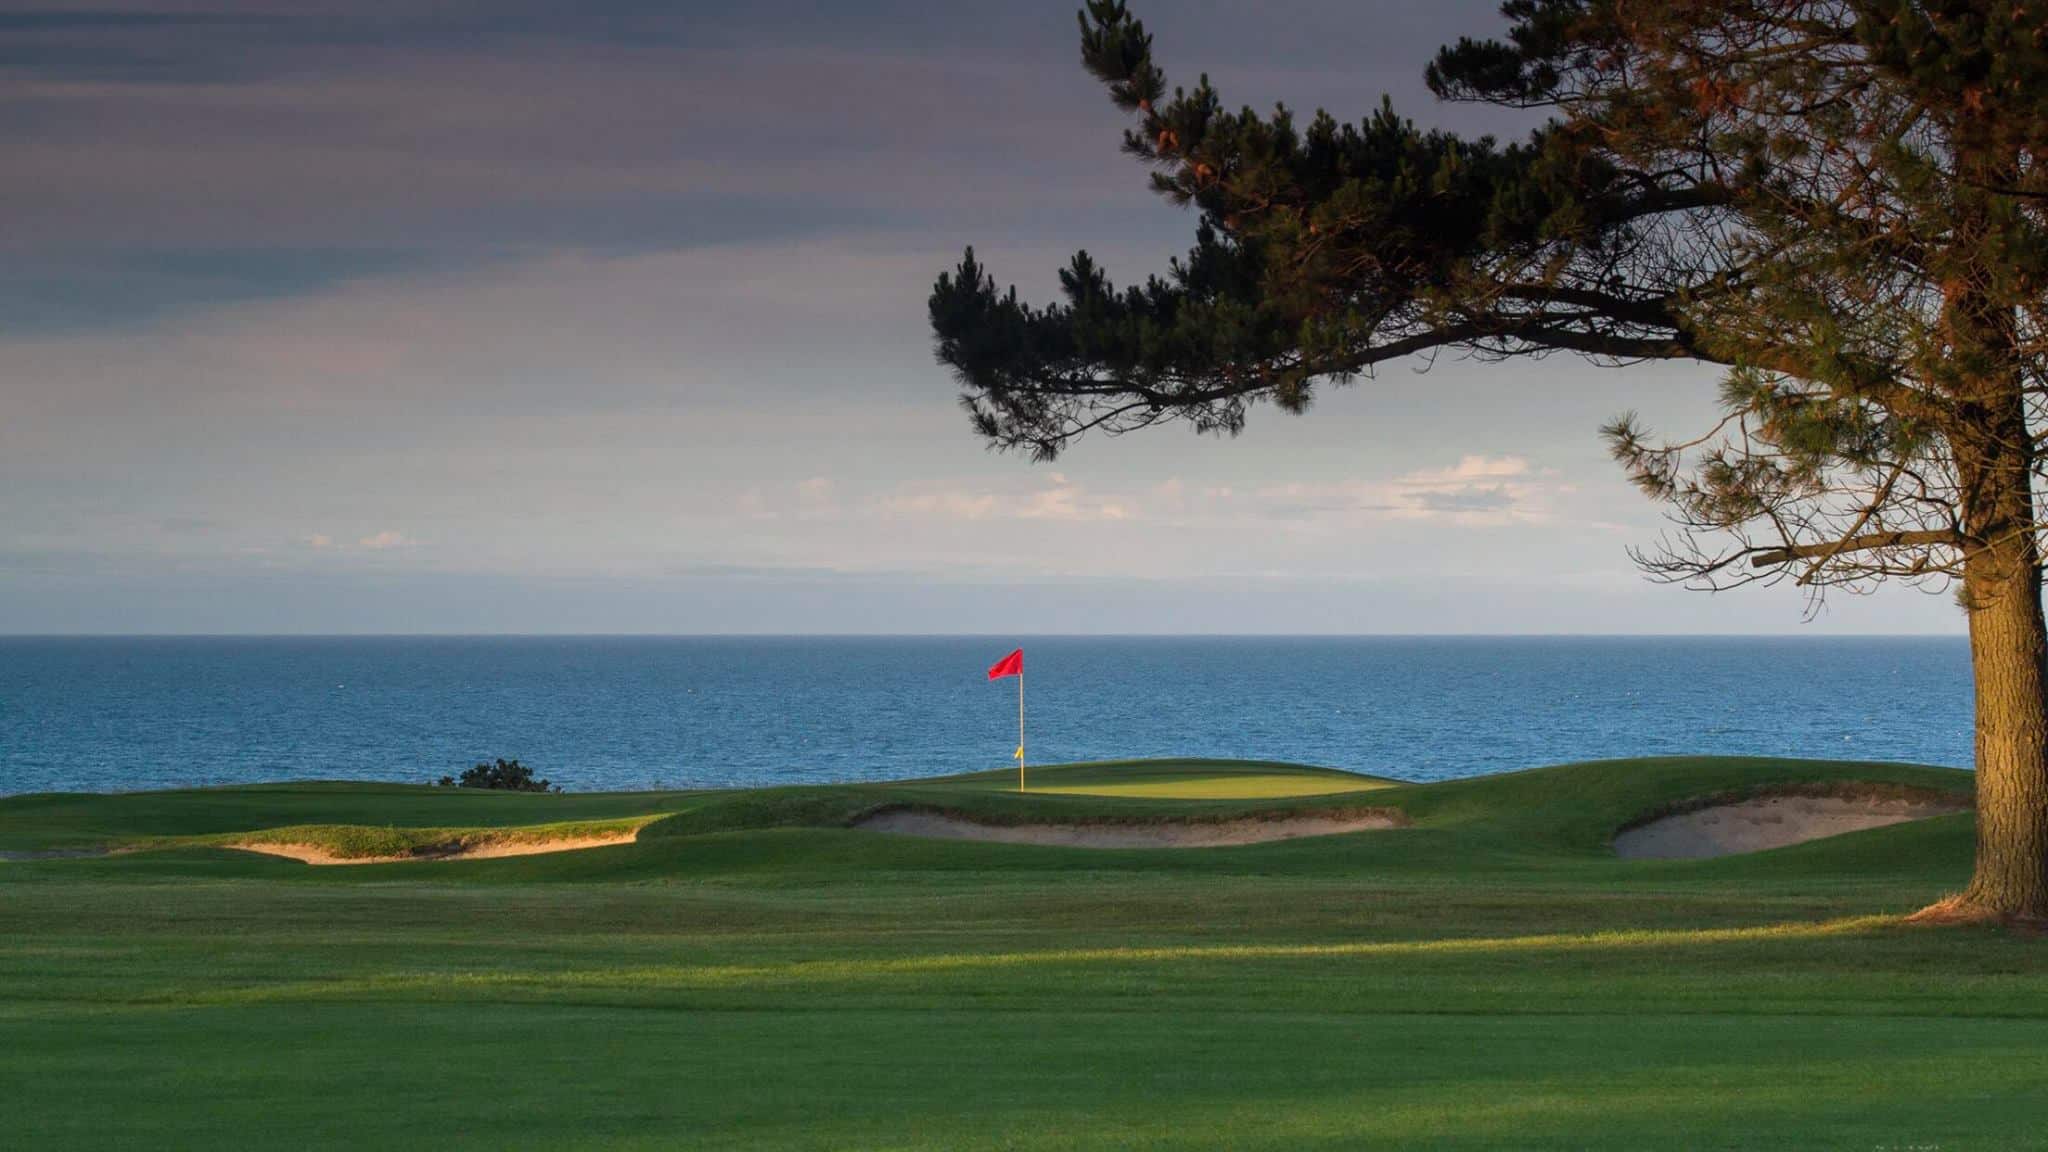 Woodbrook Golf Club - Between the mountains and the Irish Sea - Lecoingolf